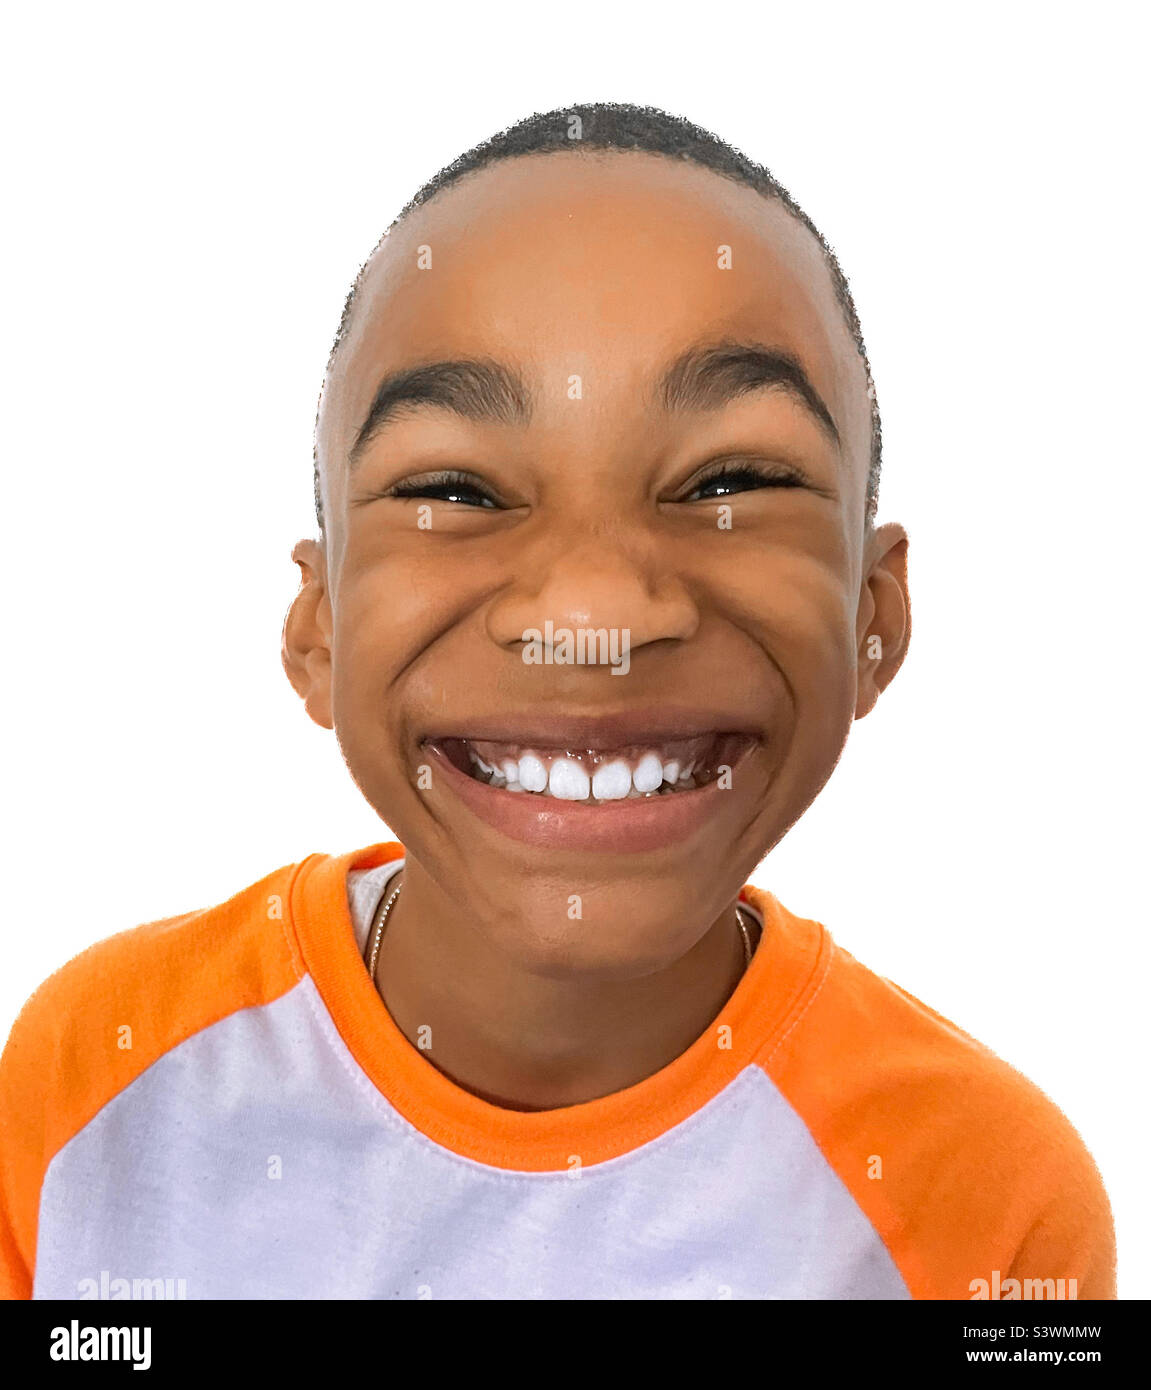 Young black male making a dramatic, excited facial expression. Stock Photo